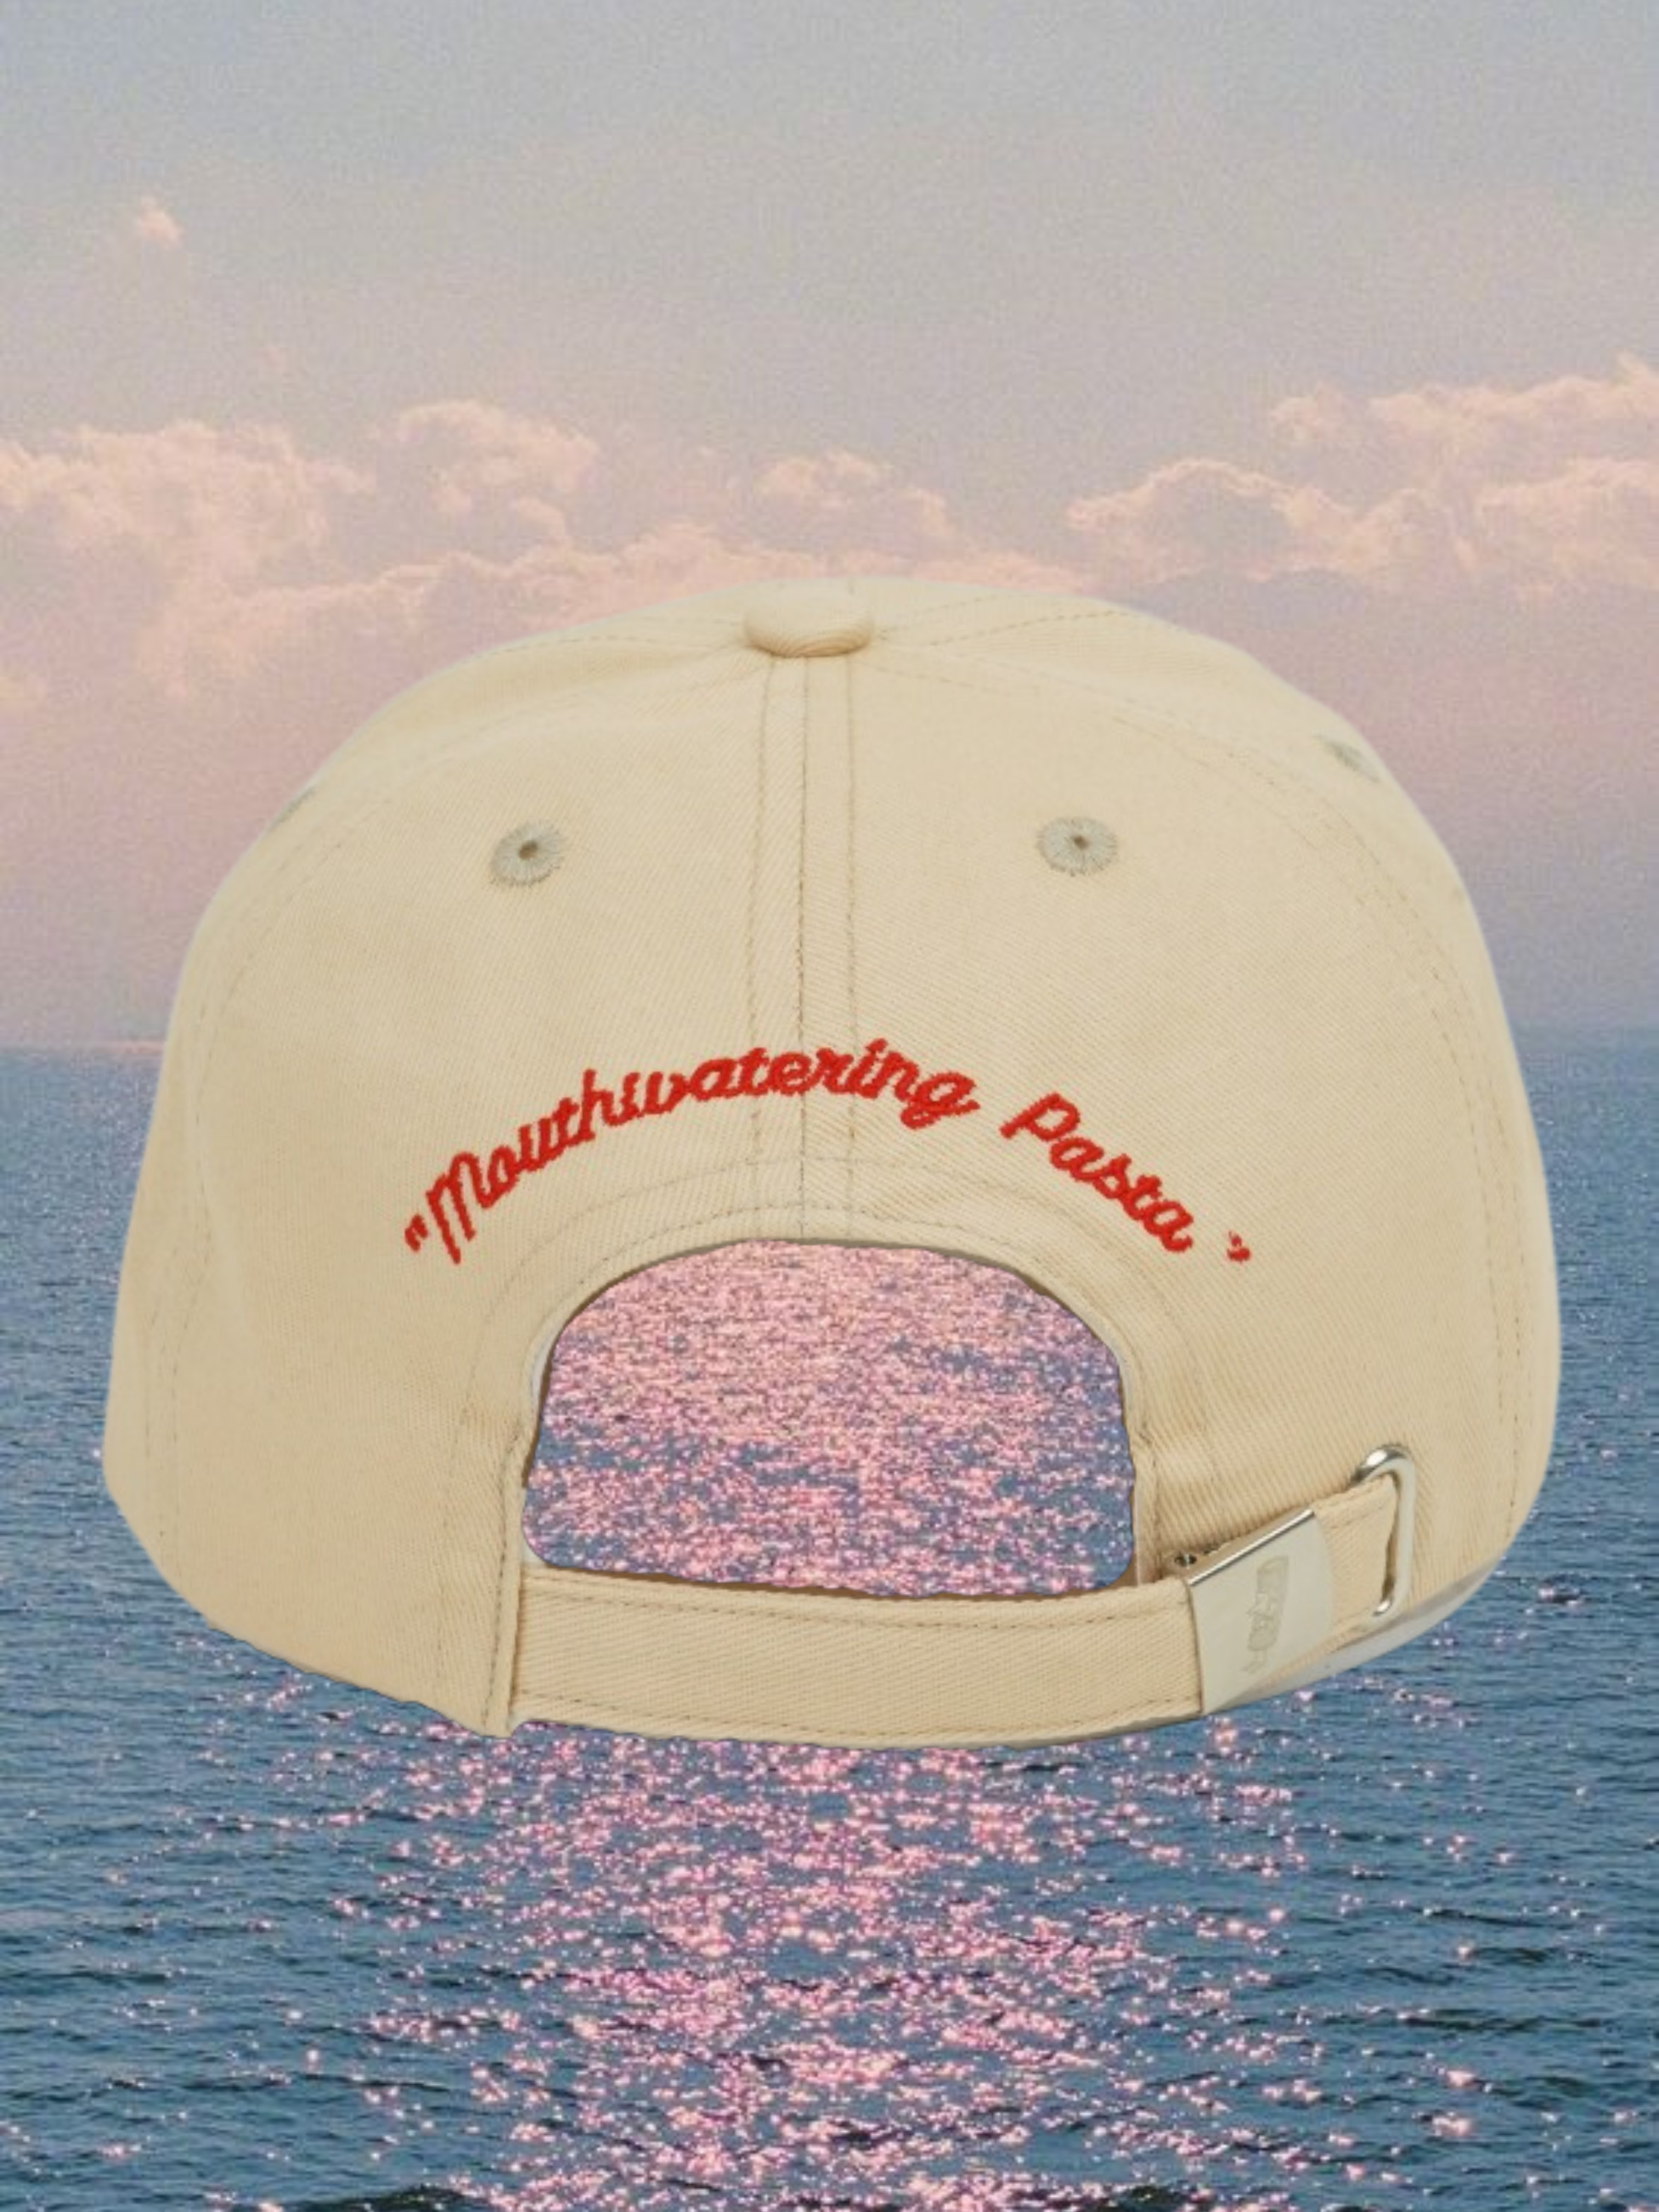 L'Isolina "Mouthwatering Pasta" Hat